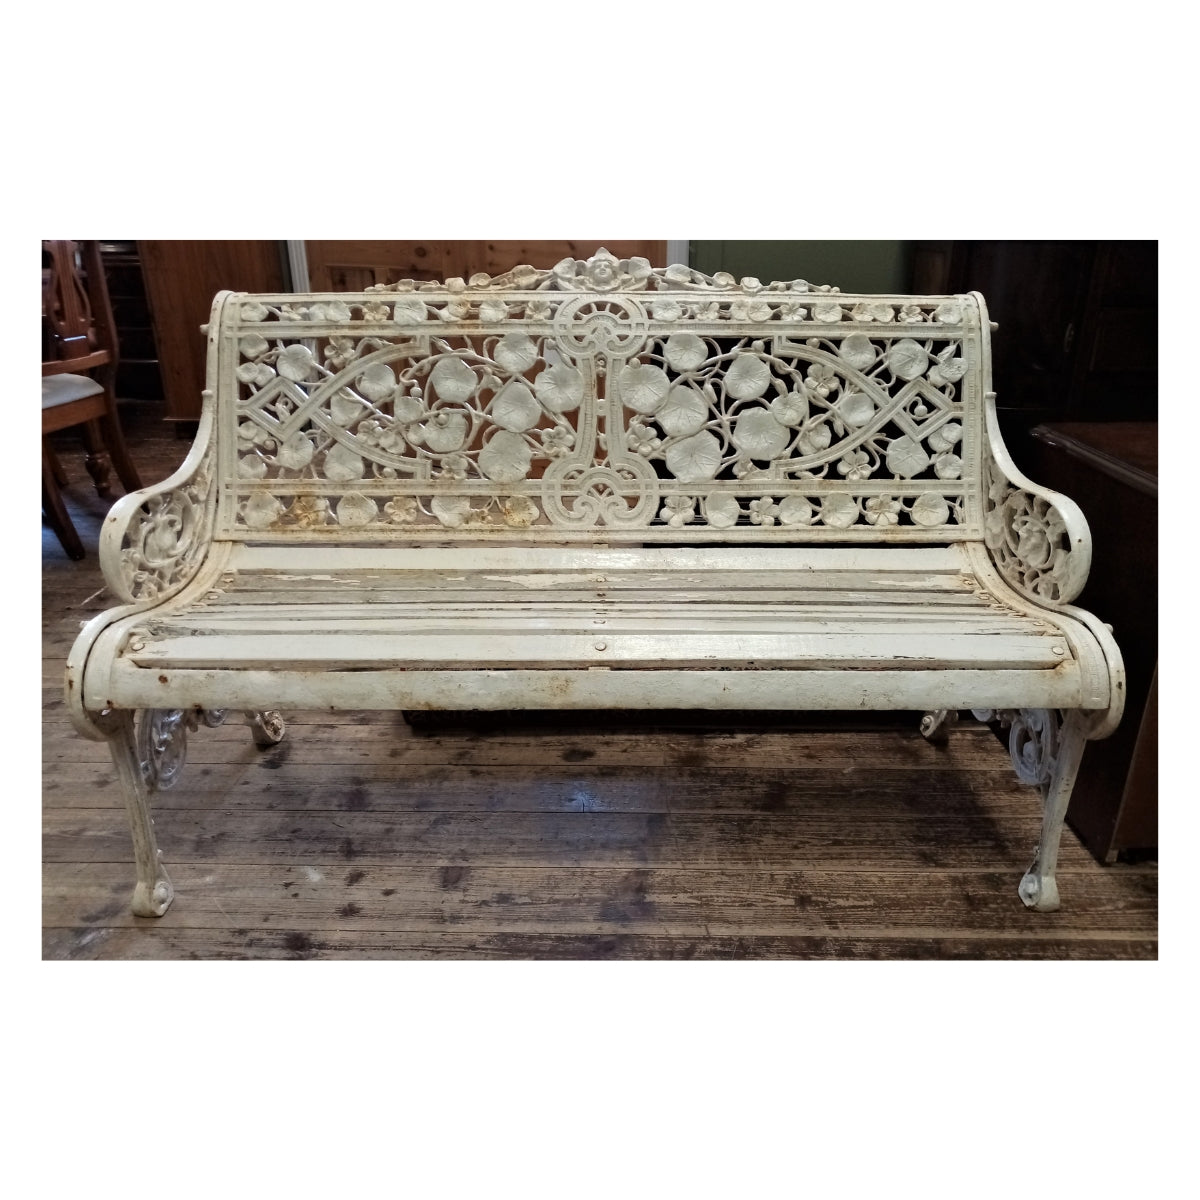 Cast Iron Garden Bench with Cherub and Leaves